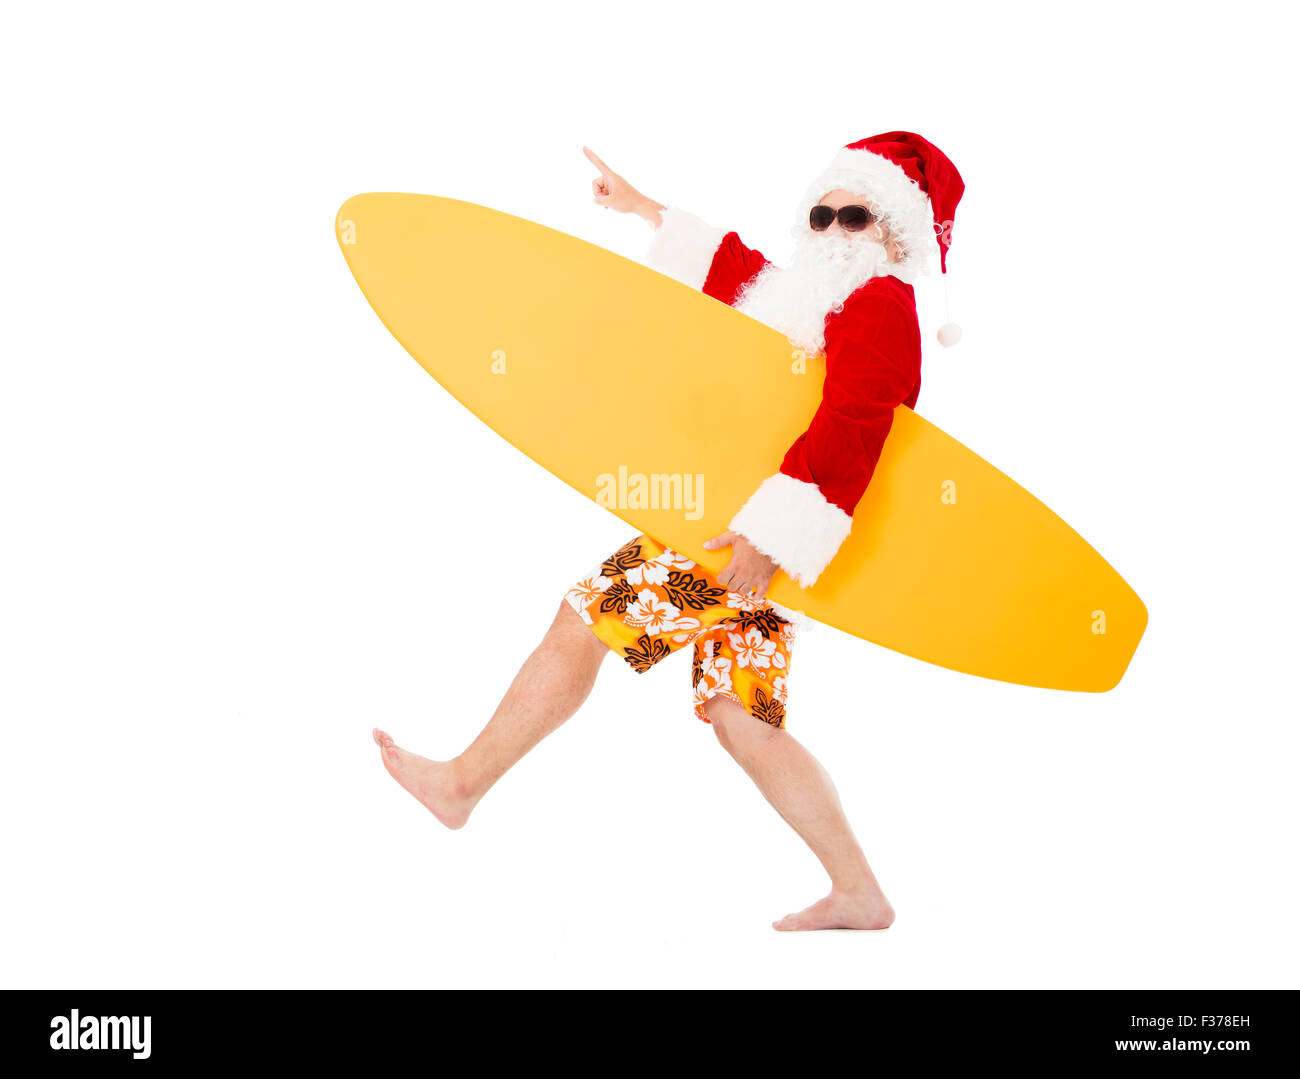 Happy Santa Claus holding surf board with pointing gesture Stock Photo